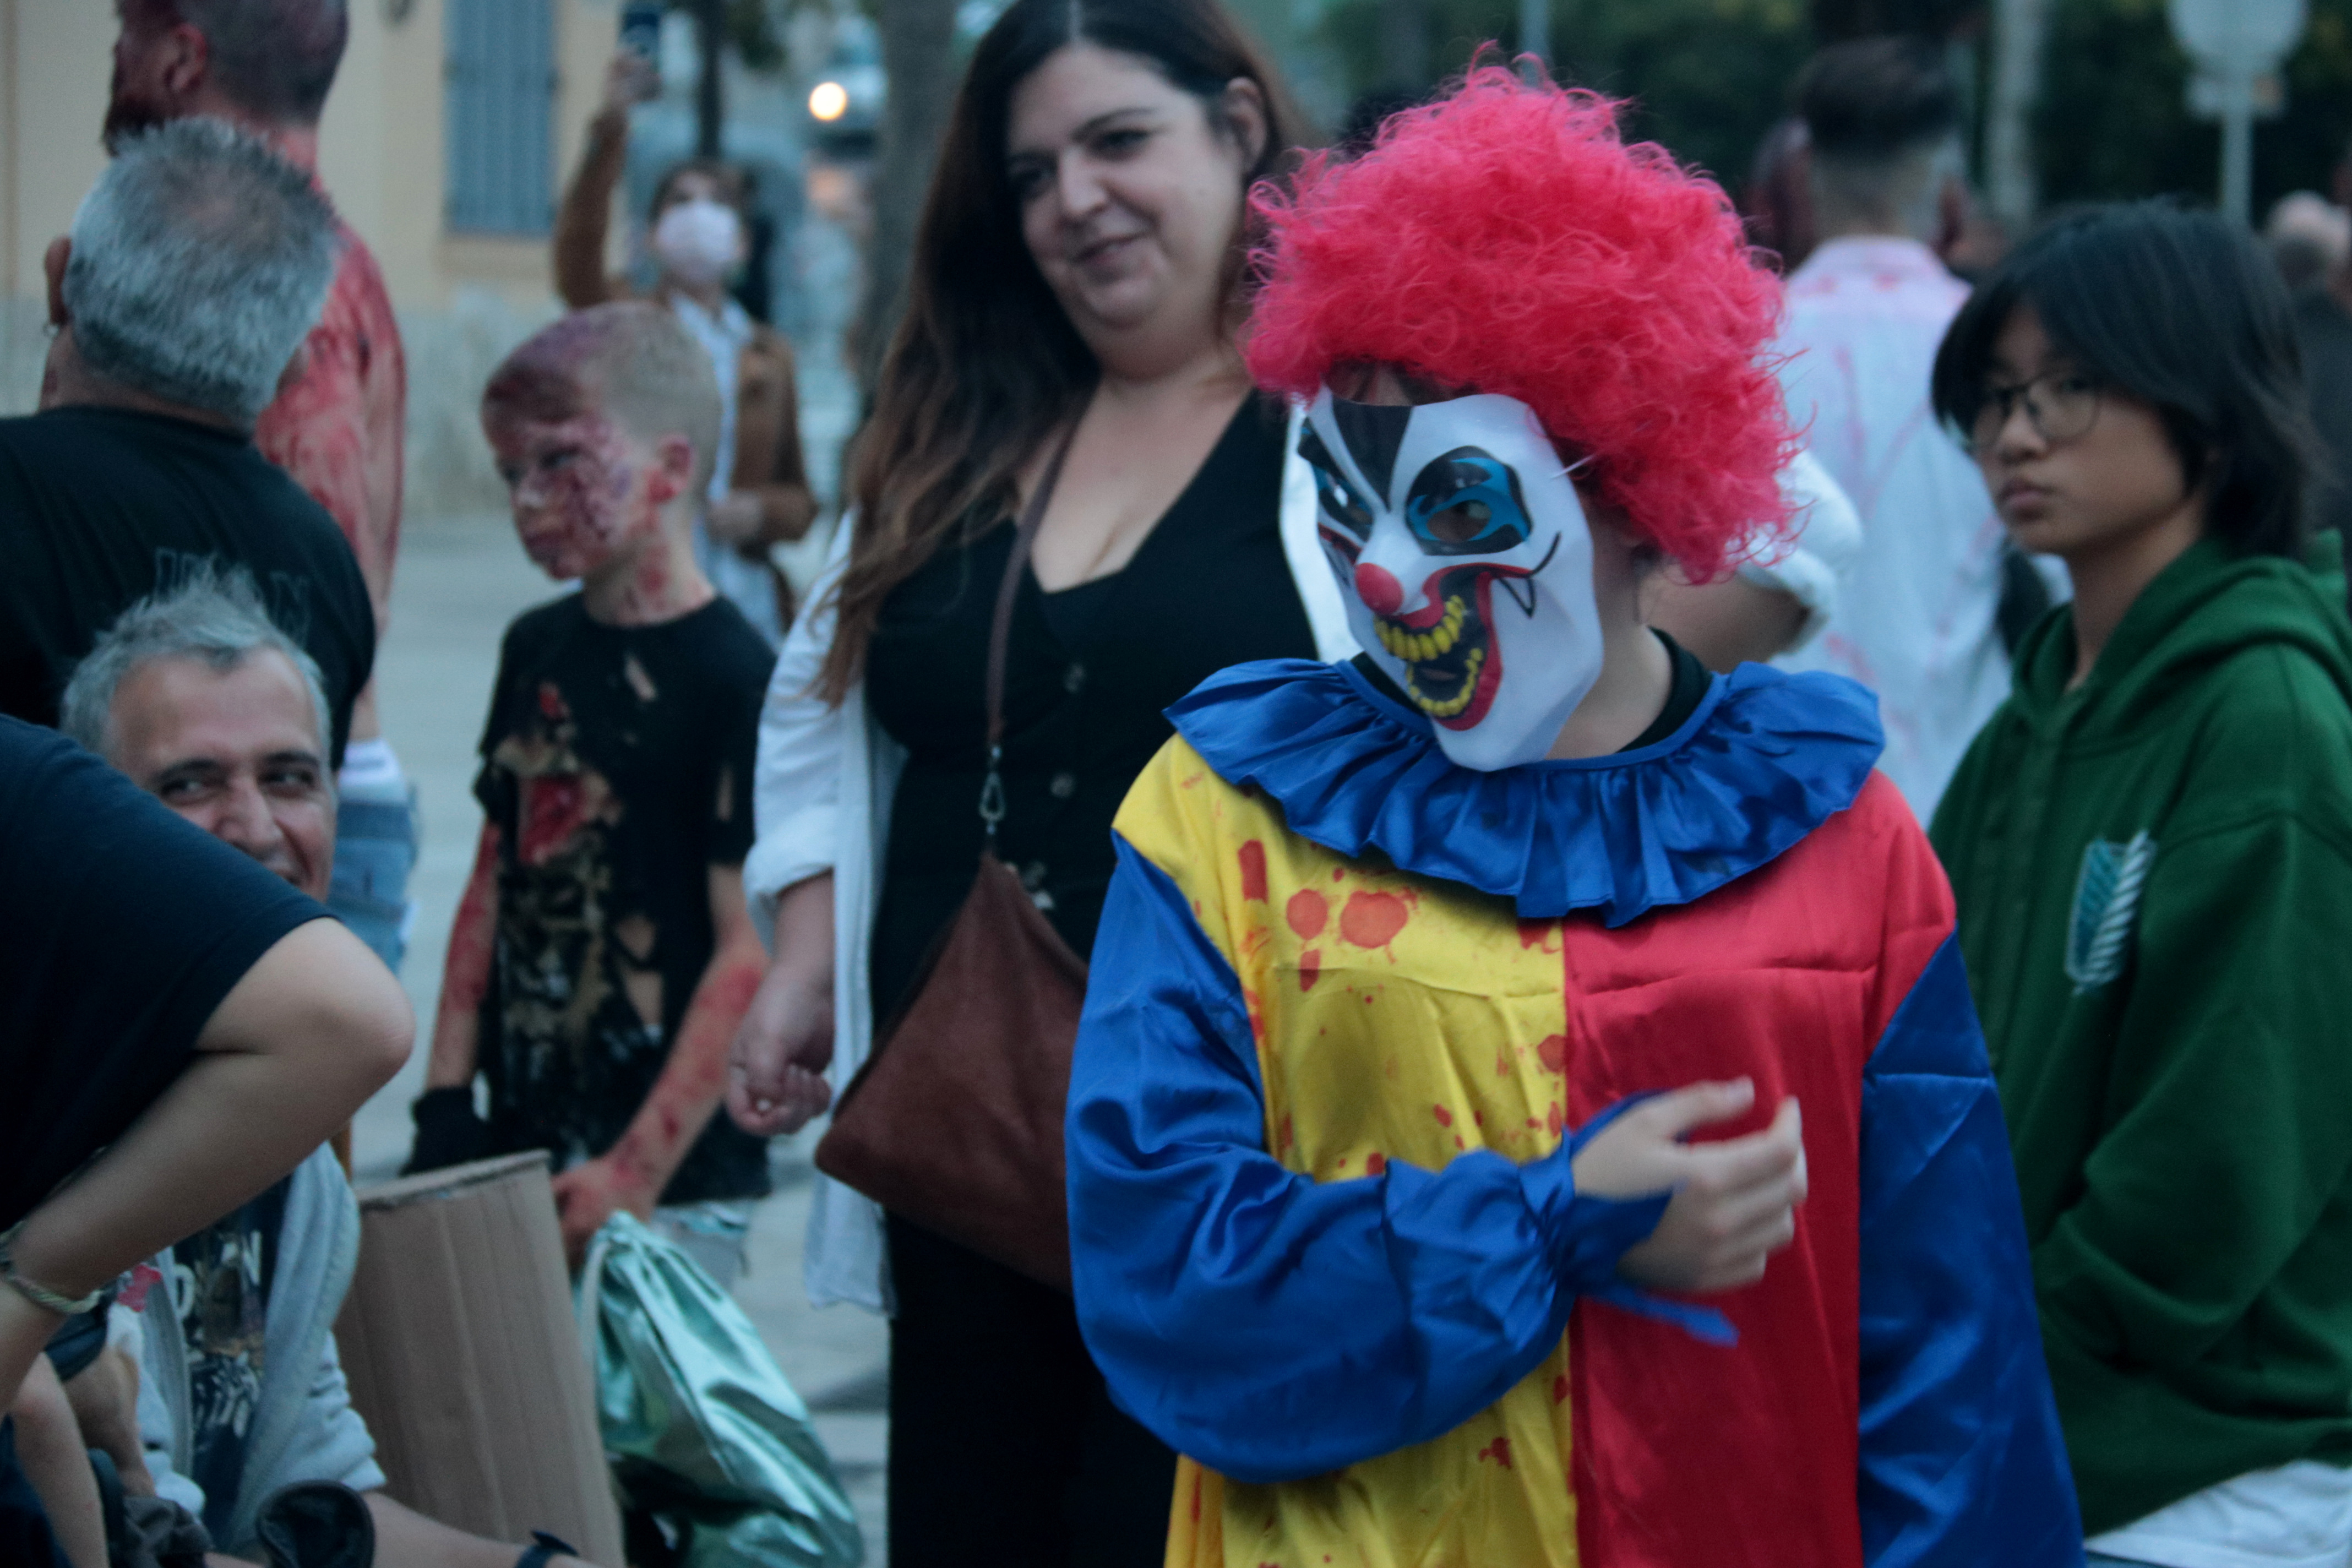 Spooky costumes at Sitges Zombie Walk